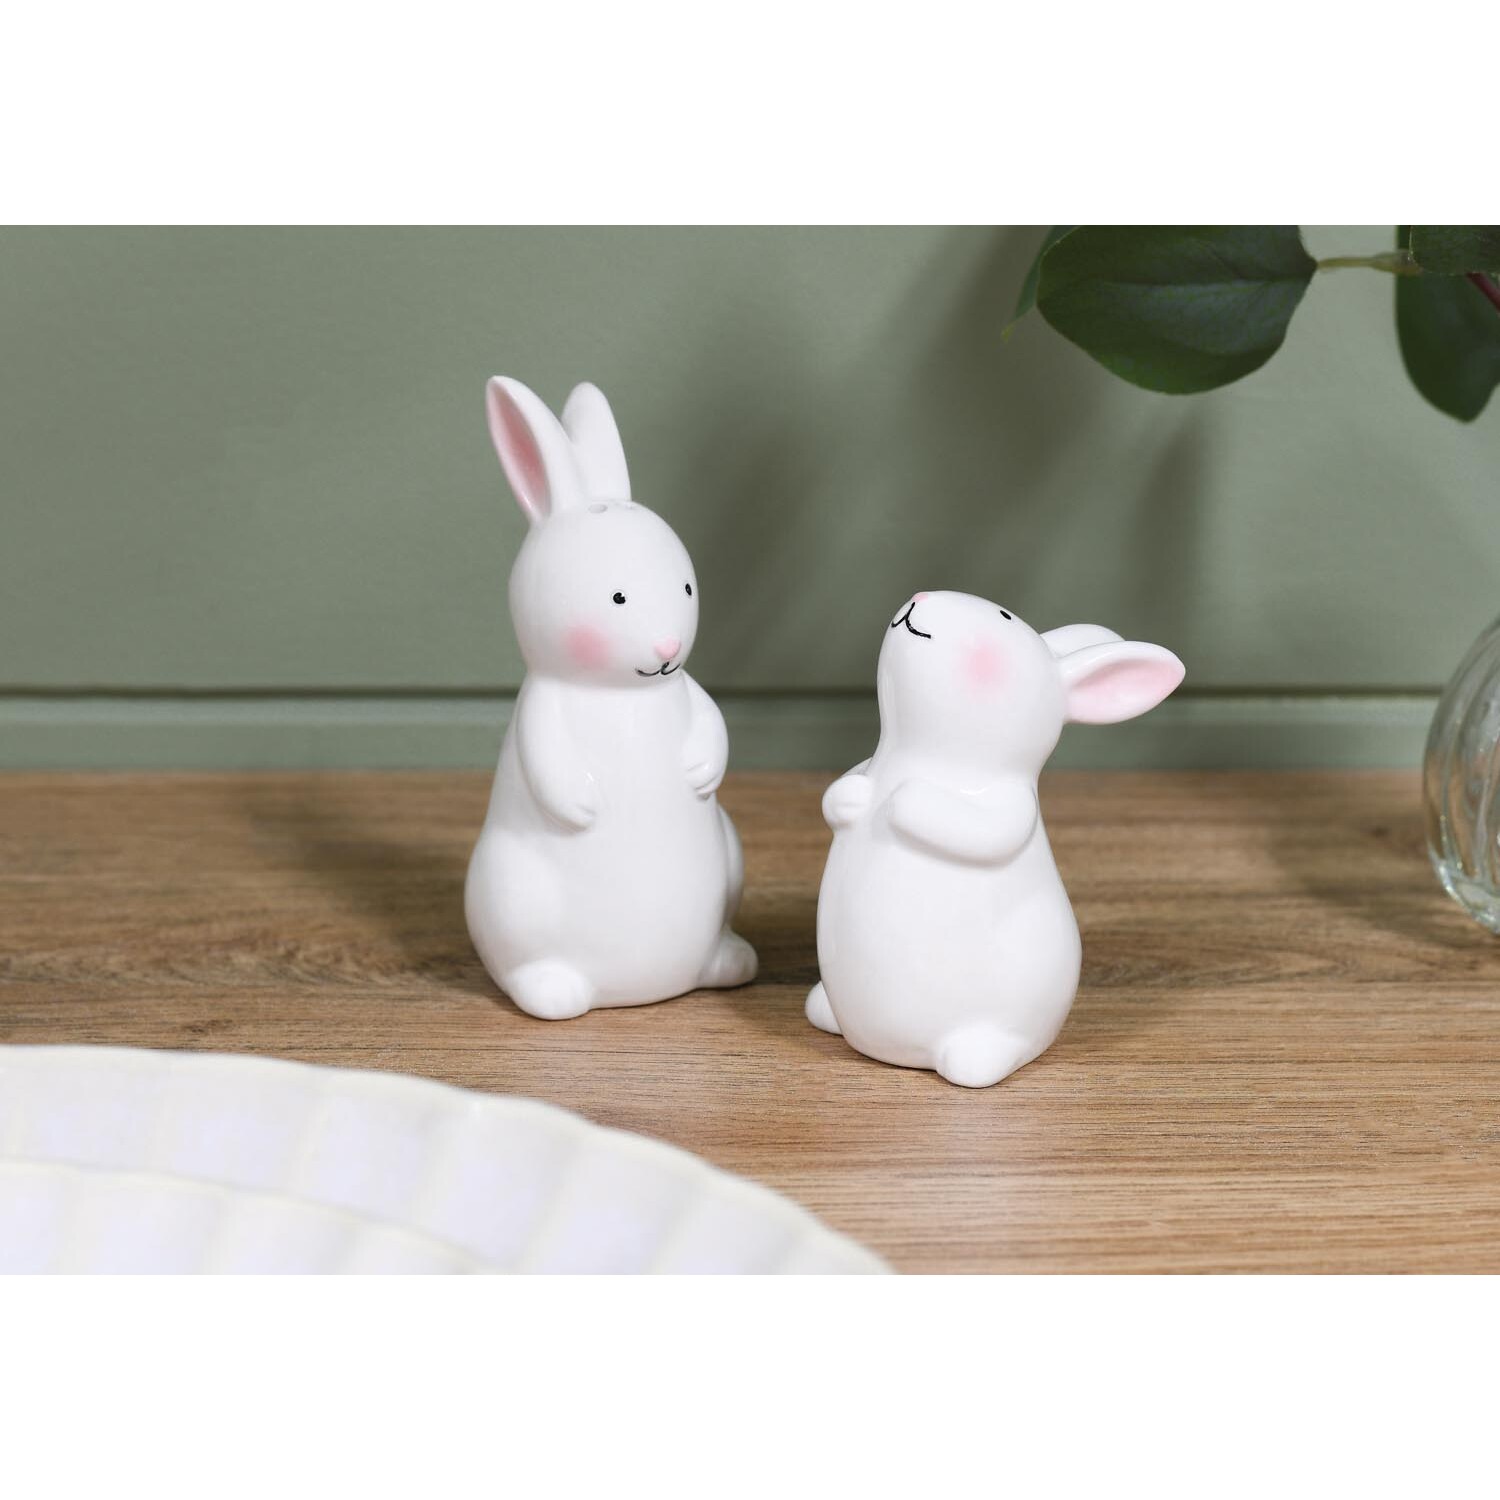 Bunny Salt and Pepper Shakers - White Image 3